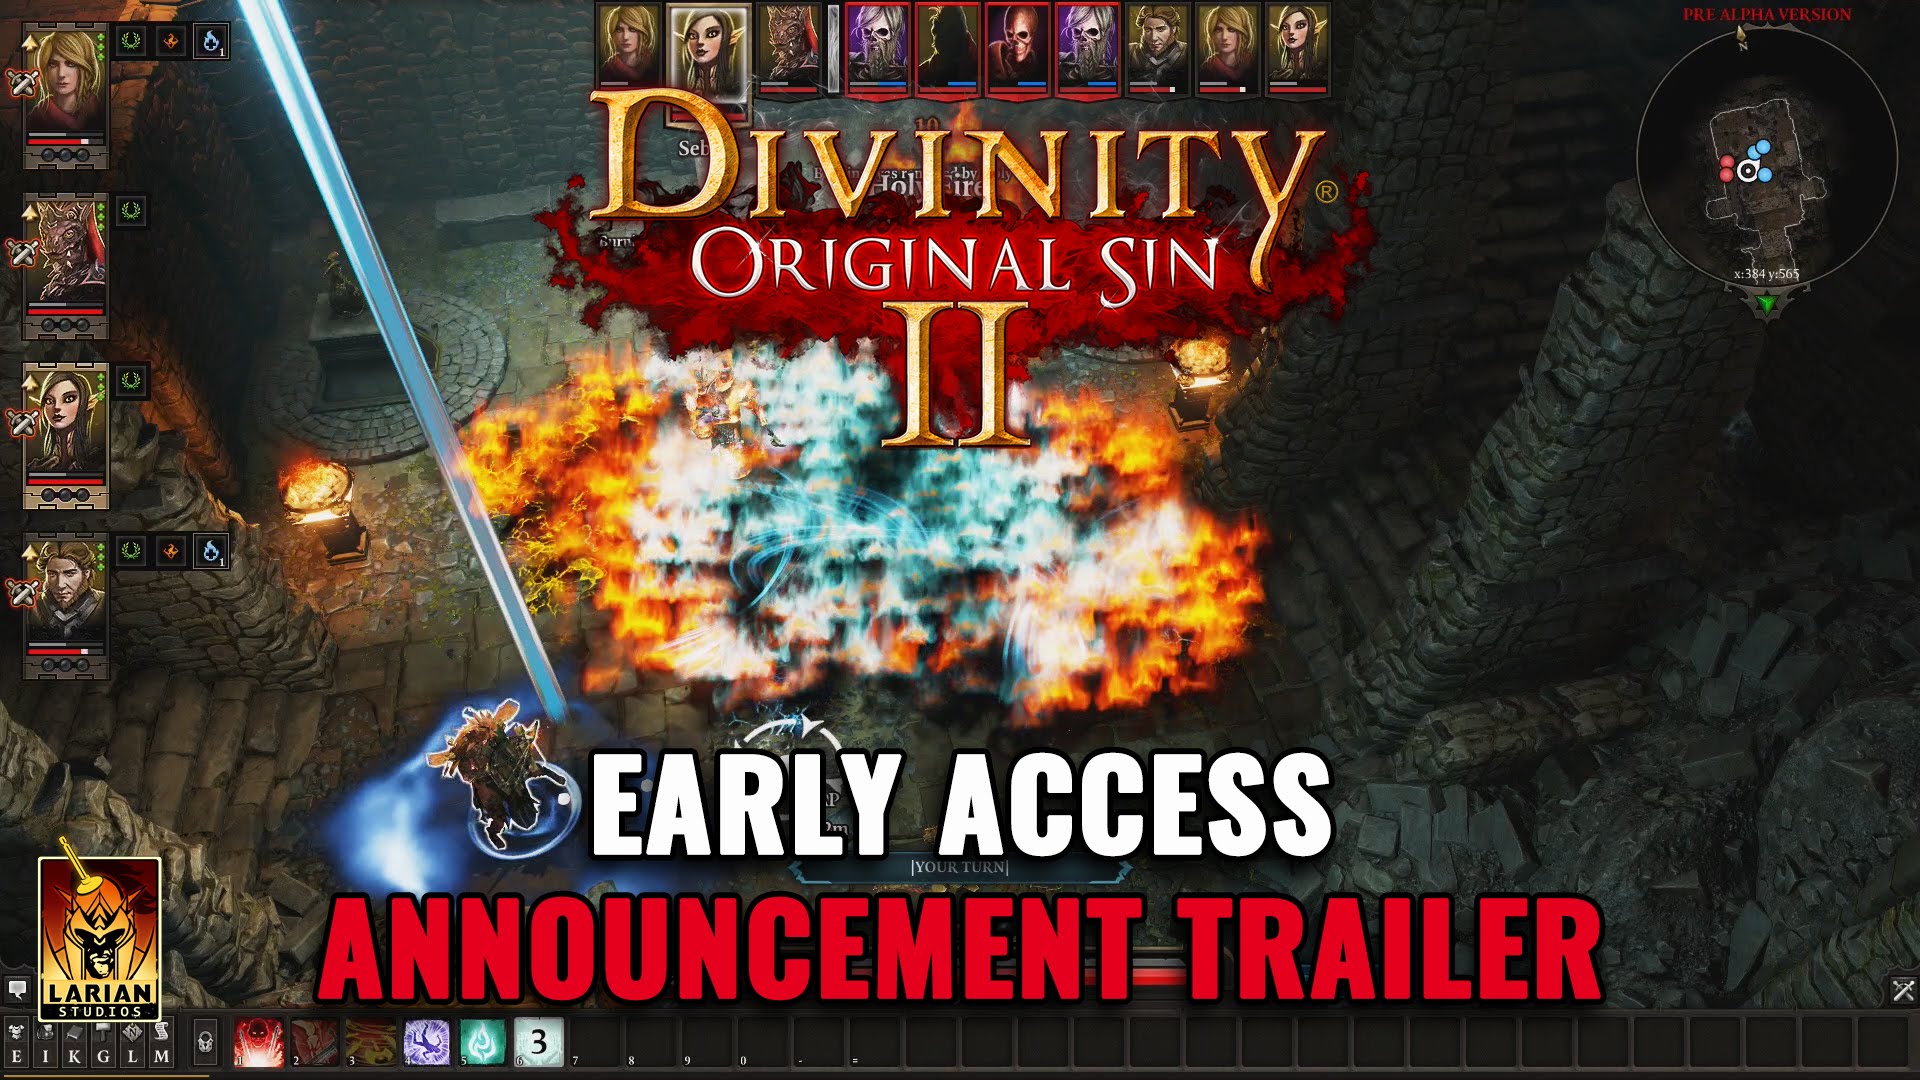 Divinity: Original Sin 2 - Early Access Announcement Trailer